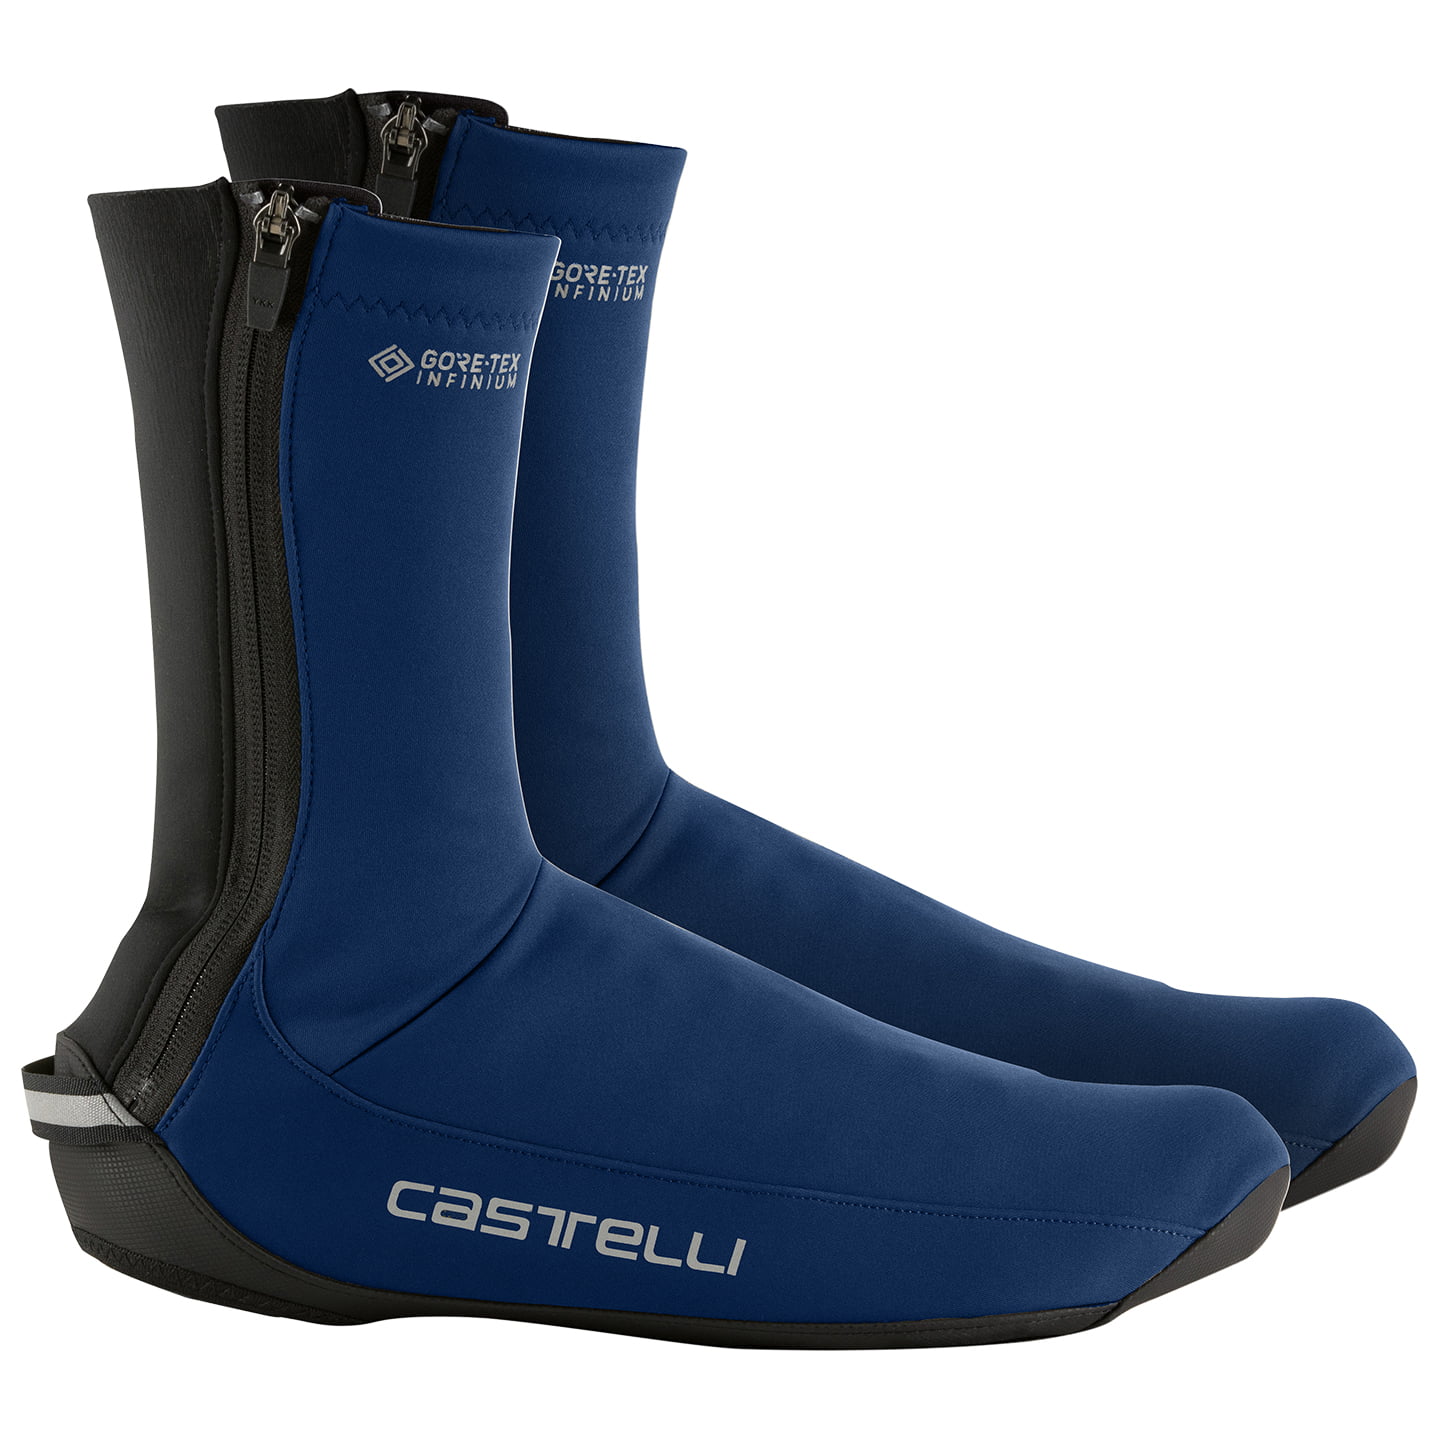 CASTELLI Espresso road bike thermal overshoes Thermal Shoe Covers, Unisex (women / men), size L, Cycling clothing